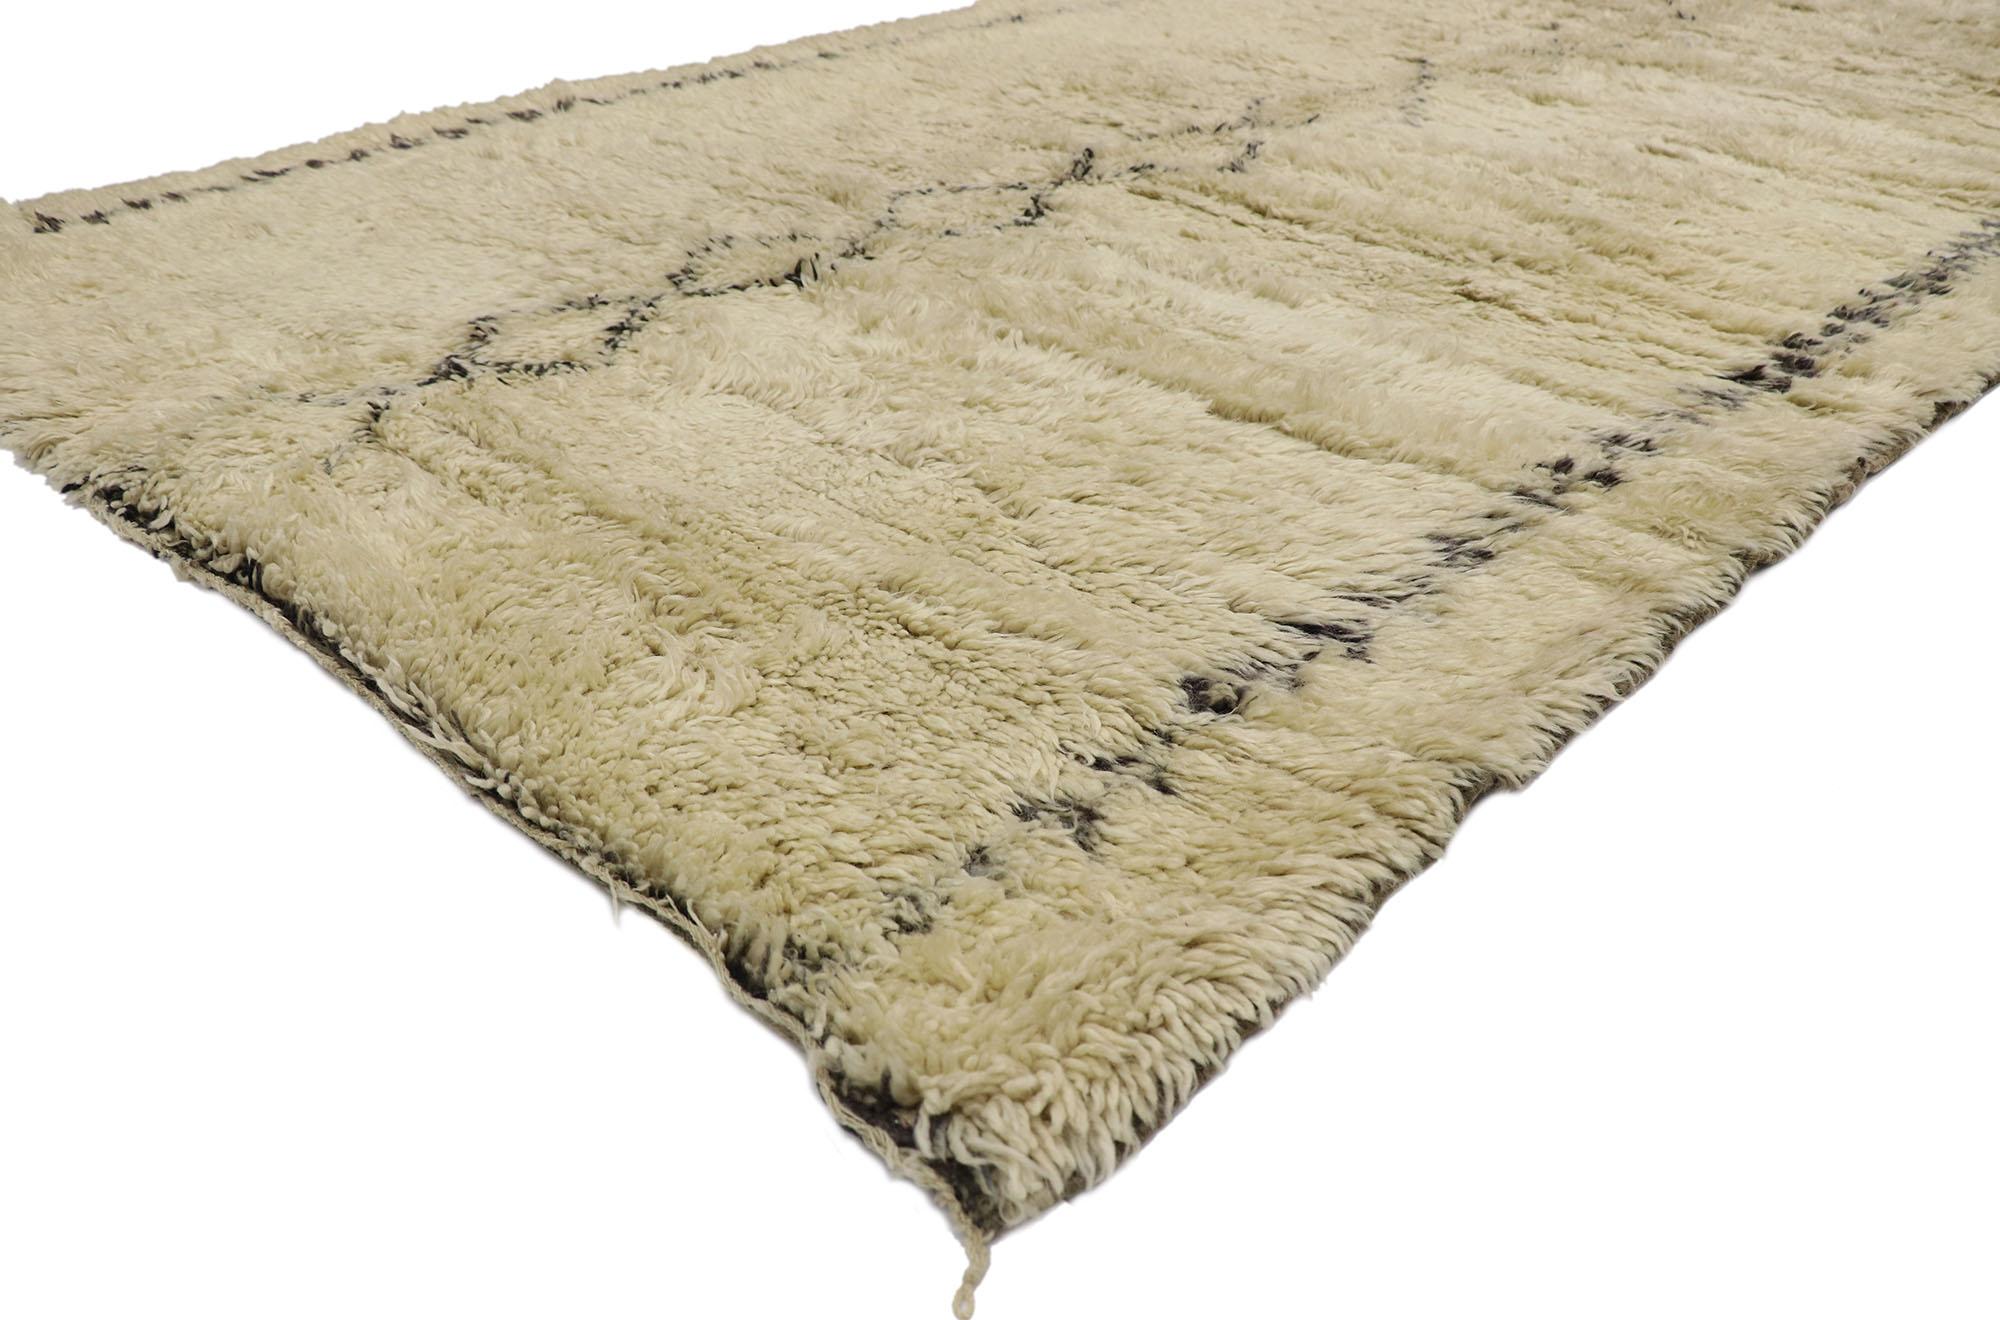 21402 Vintage Berber Beni Ourain Moroccan rug with Mid-Century Modern Style 06'07 x 11'06. With its simplicity, plush pile and Mid-Century Modern style, this hand knotted wool vintage Beni Ourain Moroccan rug provides a feeling of cozy contentment